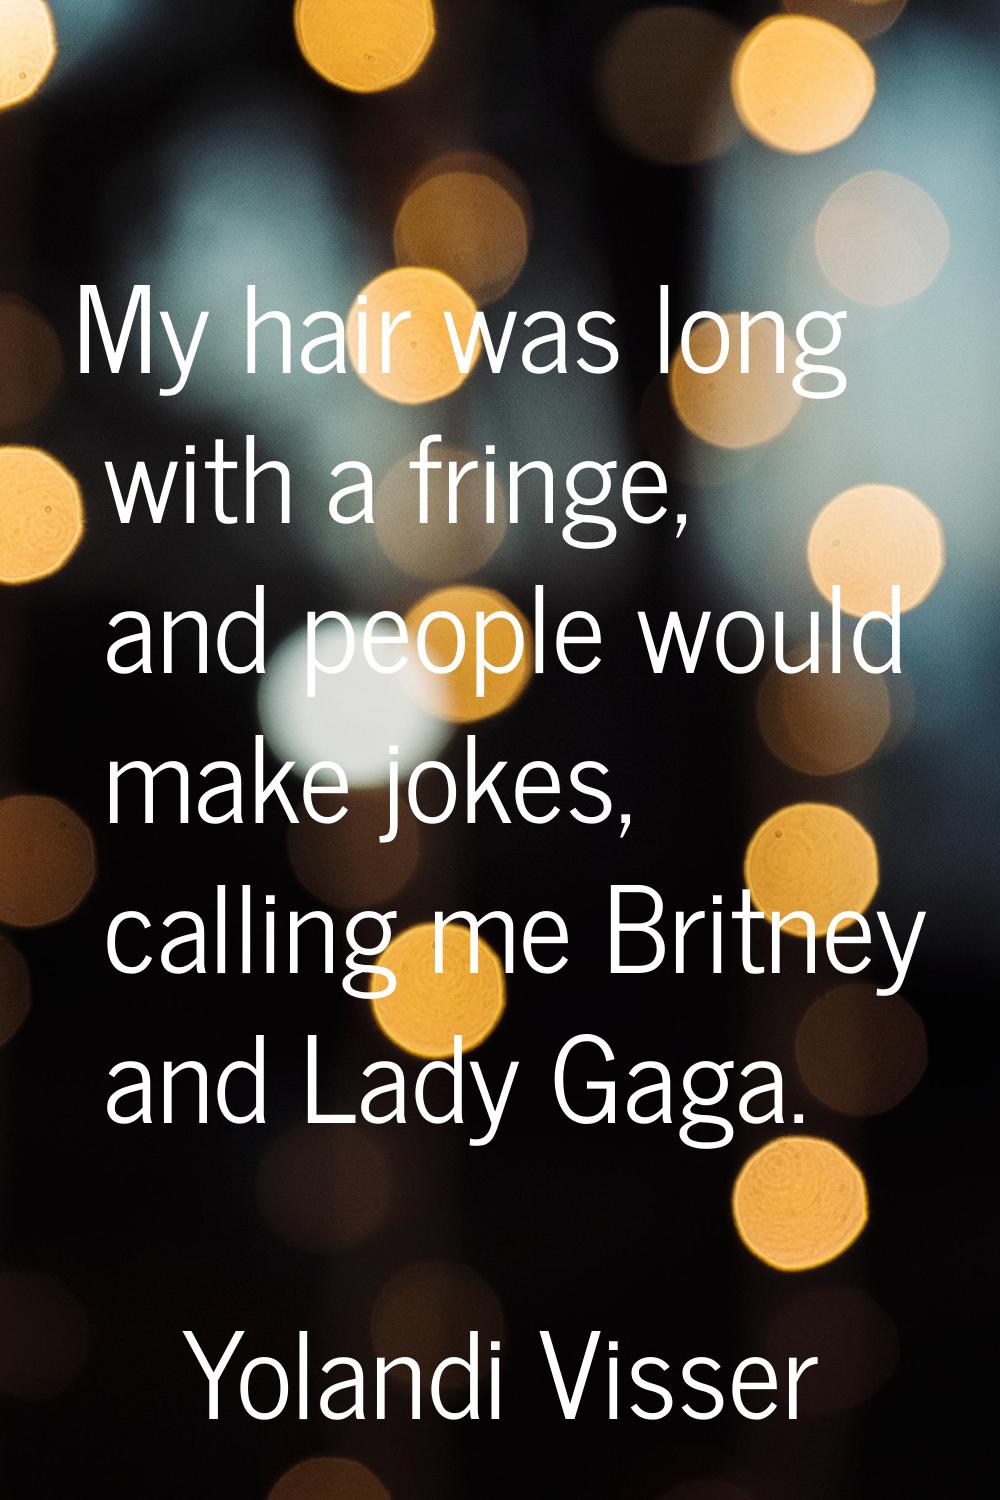 My hair was long with a fringe, and people would make jokes, calling me Britney and Lady Gaga.